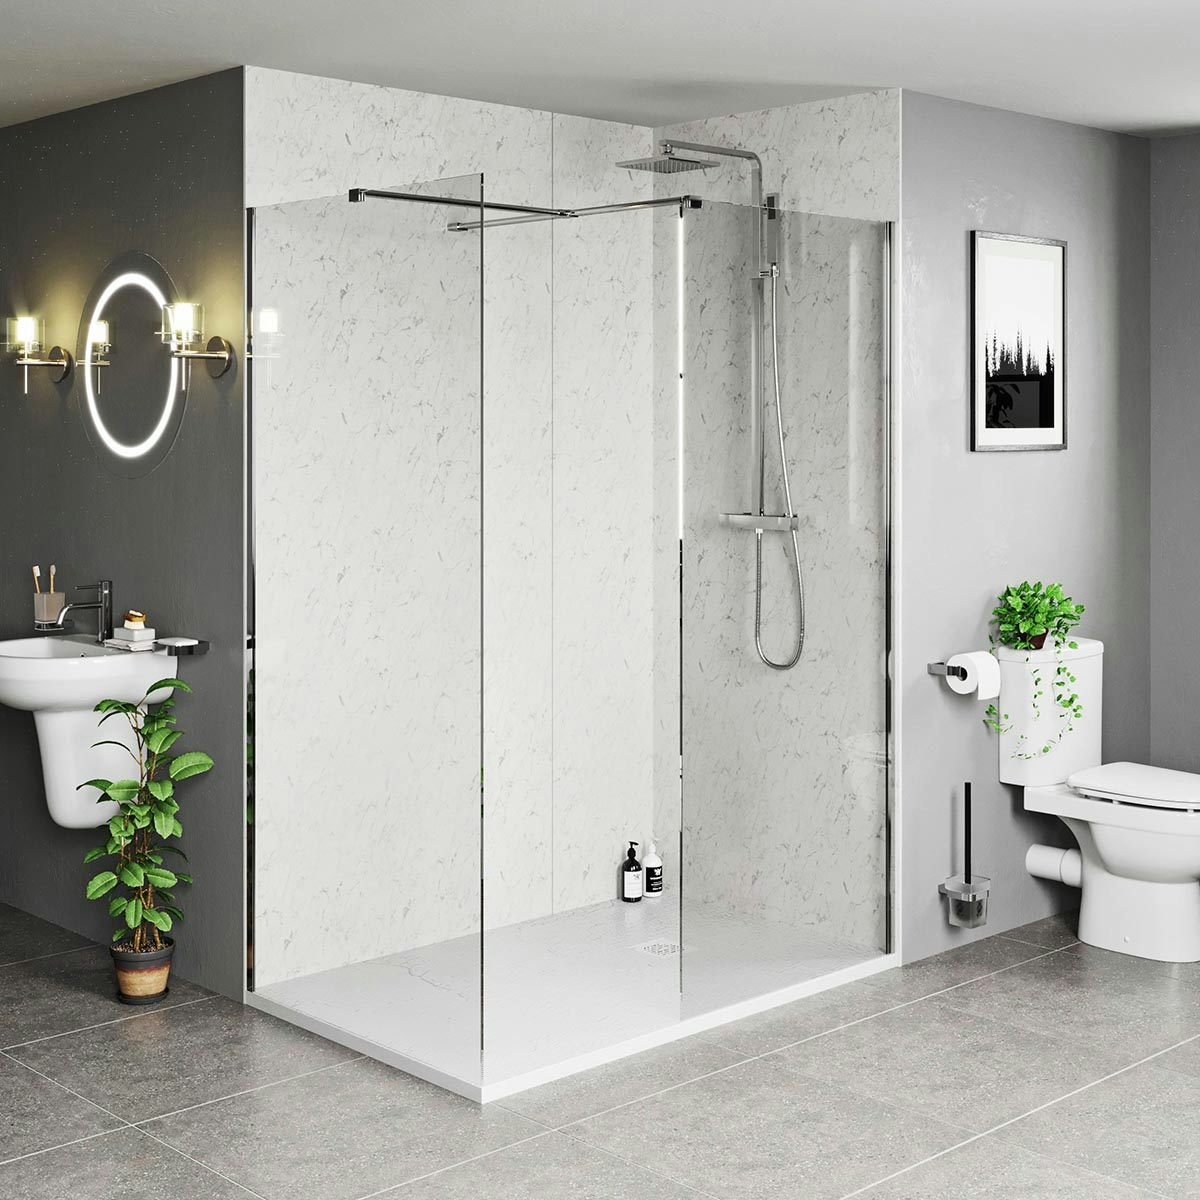 Mode Burton 8mm walk in shower enclosure pack with white stone tray 1600 x 800